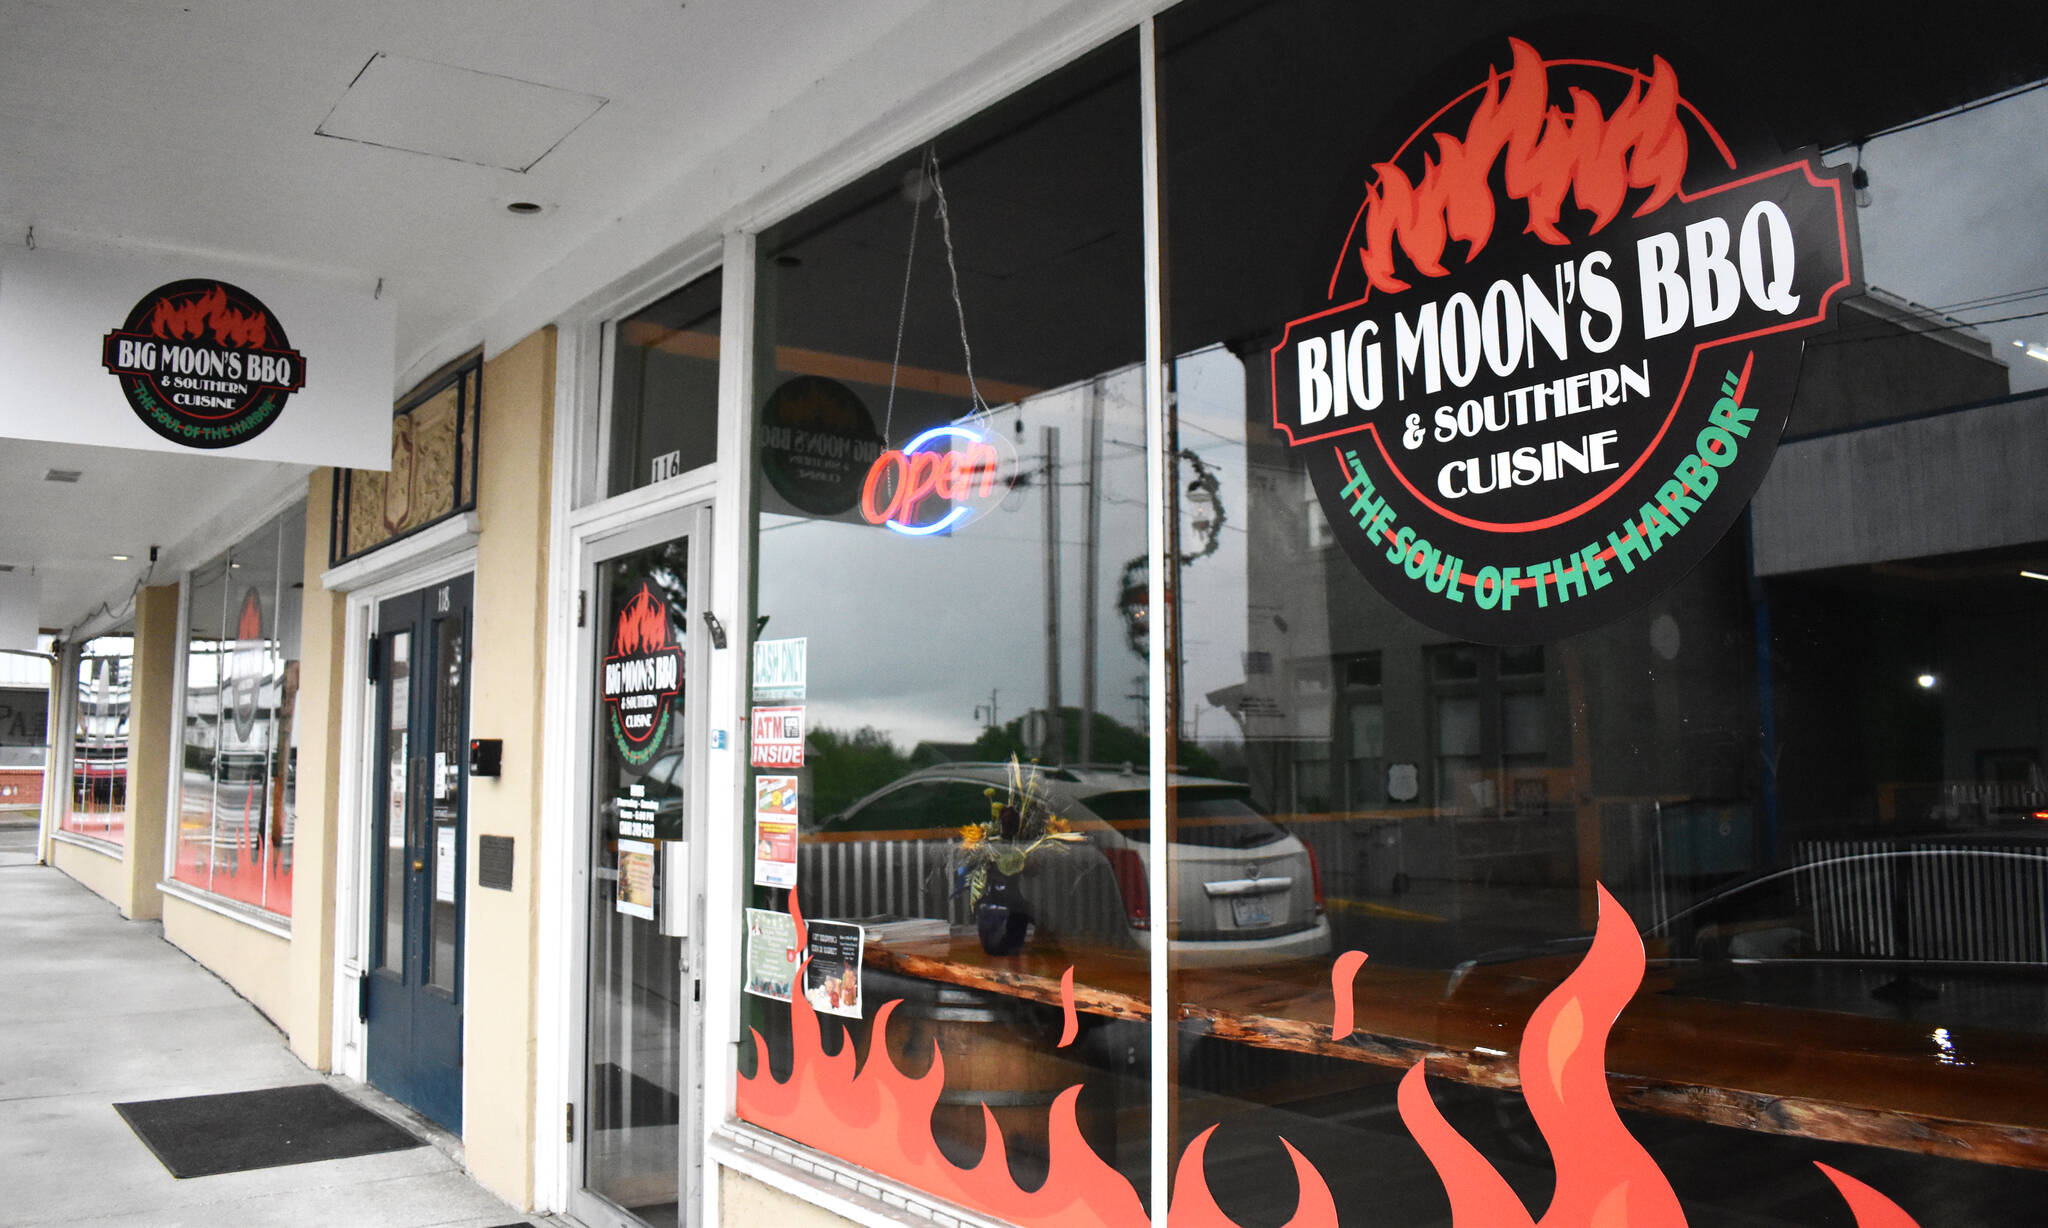 Matthew N. Wells / The Daily World 
Big Moon’s BBQ and Southern Cuisine — 116 W. Marcy Ave., in Montesano — promises southern barbecue to the Harbor. Inside is a friendly staff led by Kevin Mooney, who owns the restaurant. The food served comes from Mooney’s roots as a young kid who learned by watching his grandmother. He’s proud to share a taste of his familial roots with anyone who steps inside.